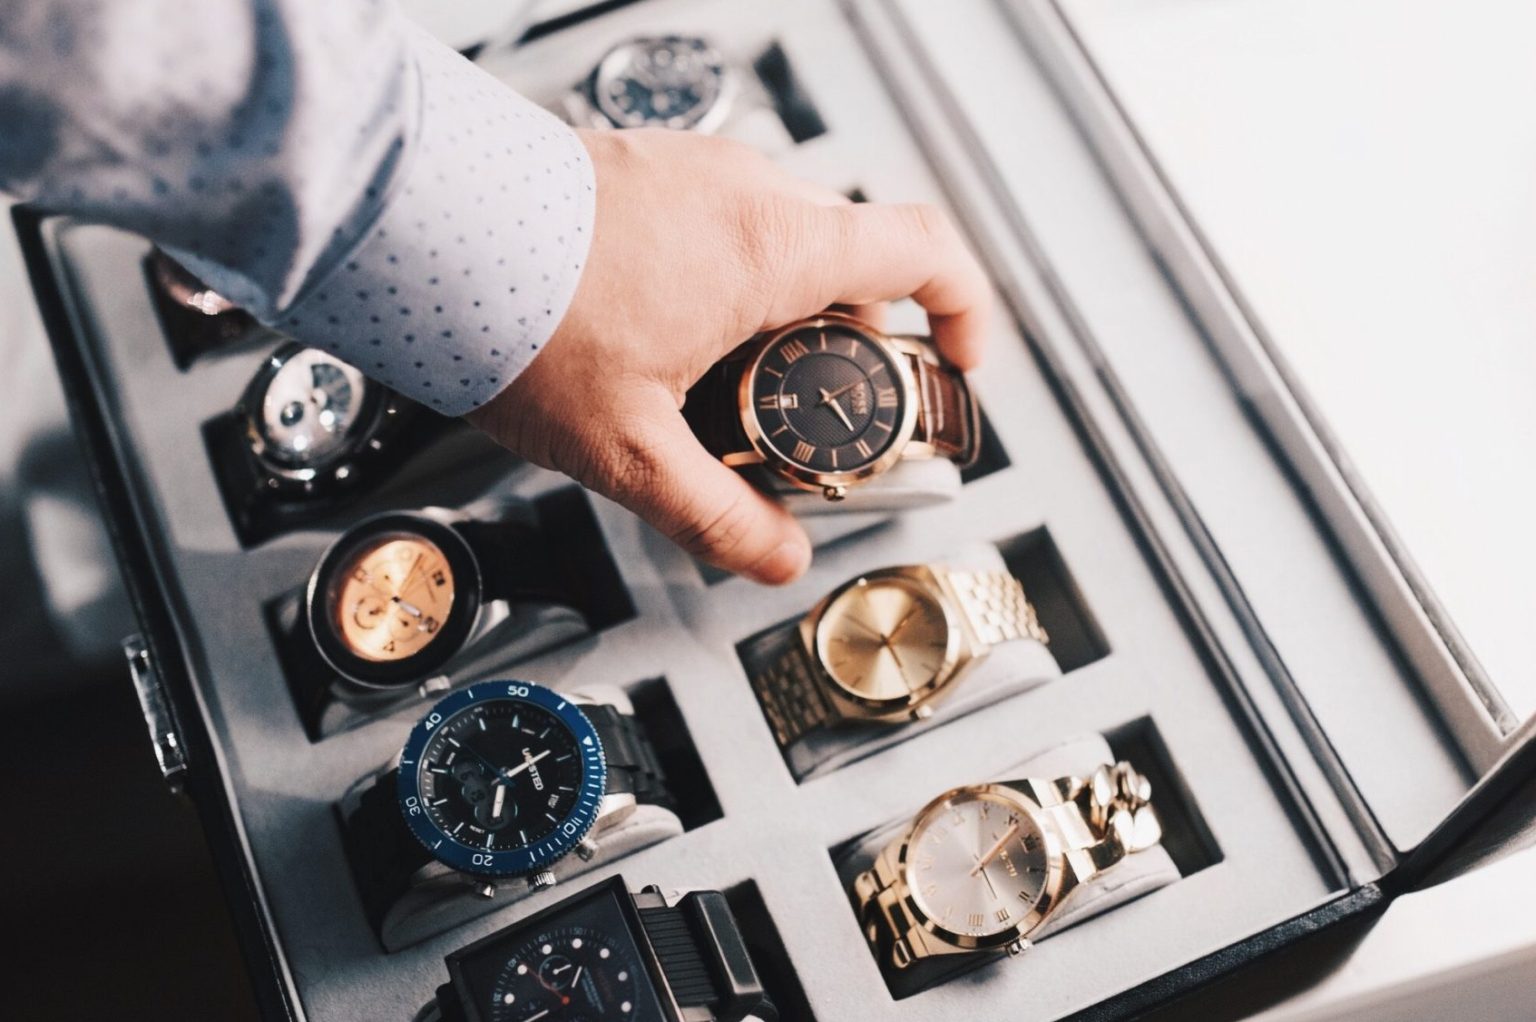 Aggregate 131+ worthy watches latest